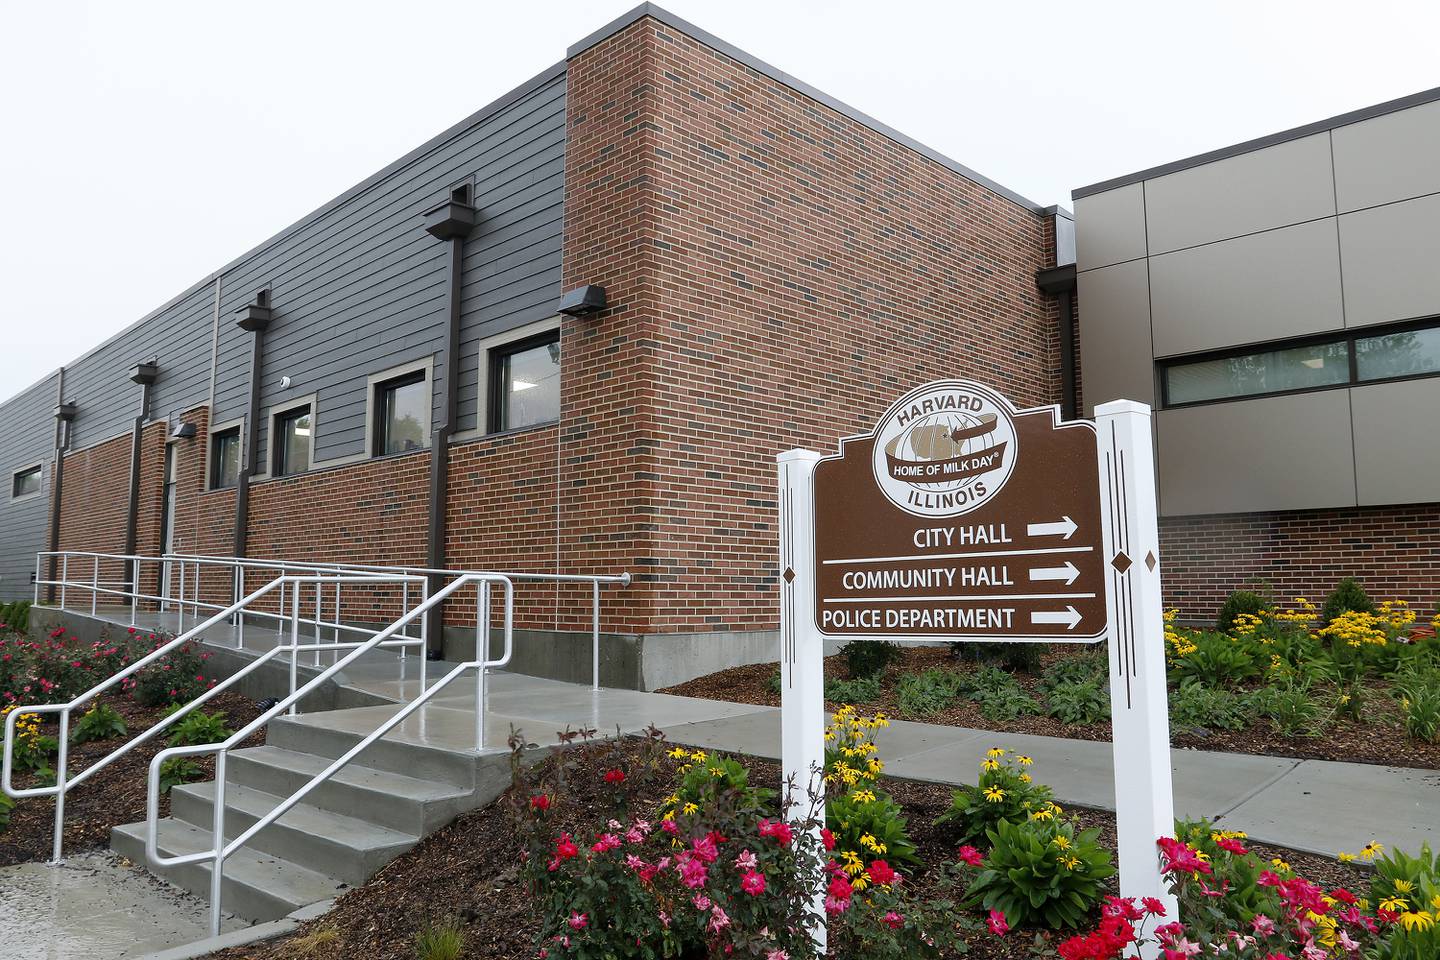 The new Harvard Police Department is seen on Tuesday, Aug. 24, 2021, in Harvard. The building has been operational since April and has been waiting for all of the finishing touches to be completed before being showcased to the public.